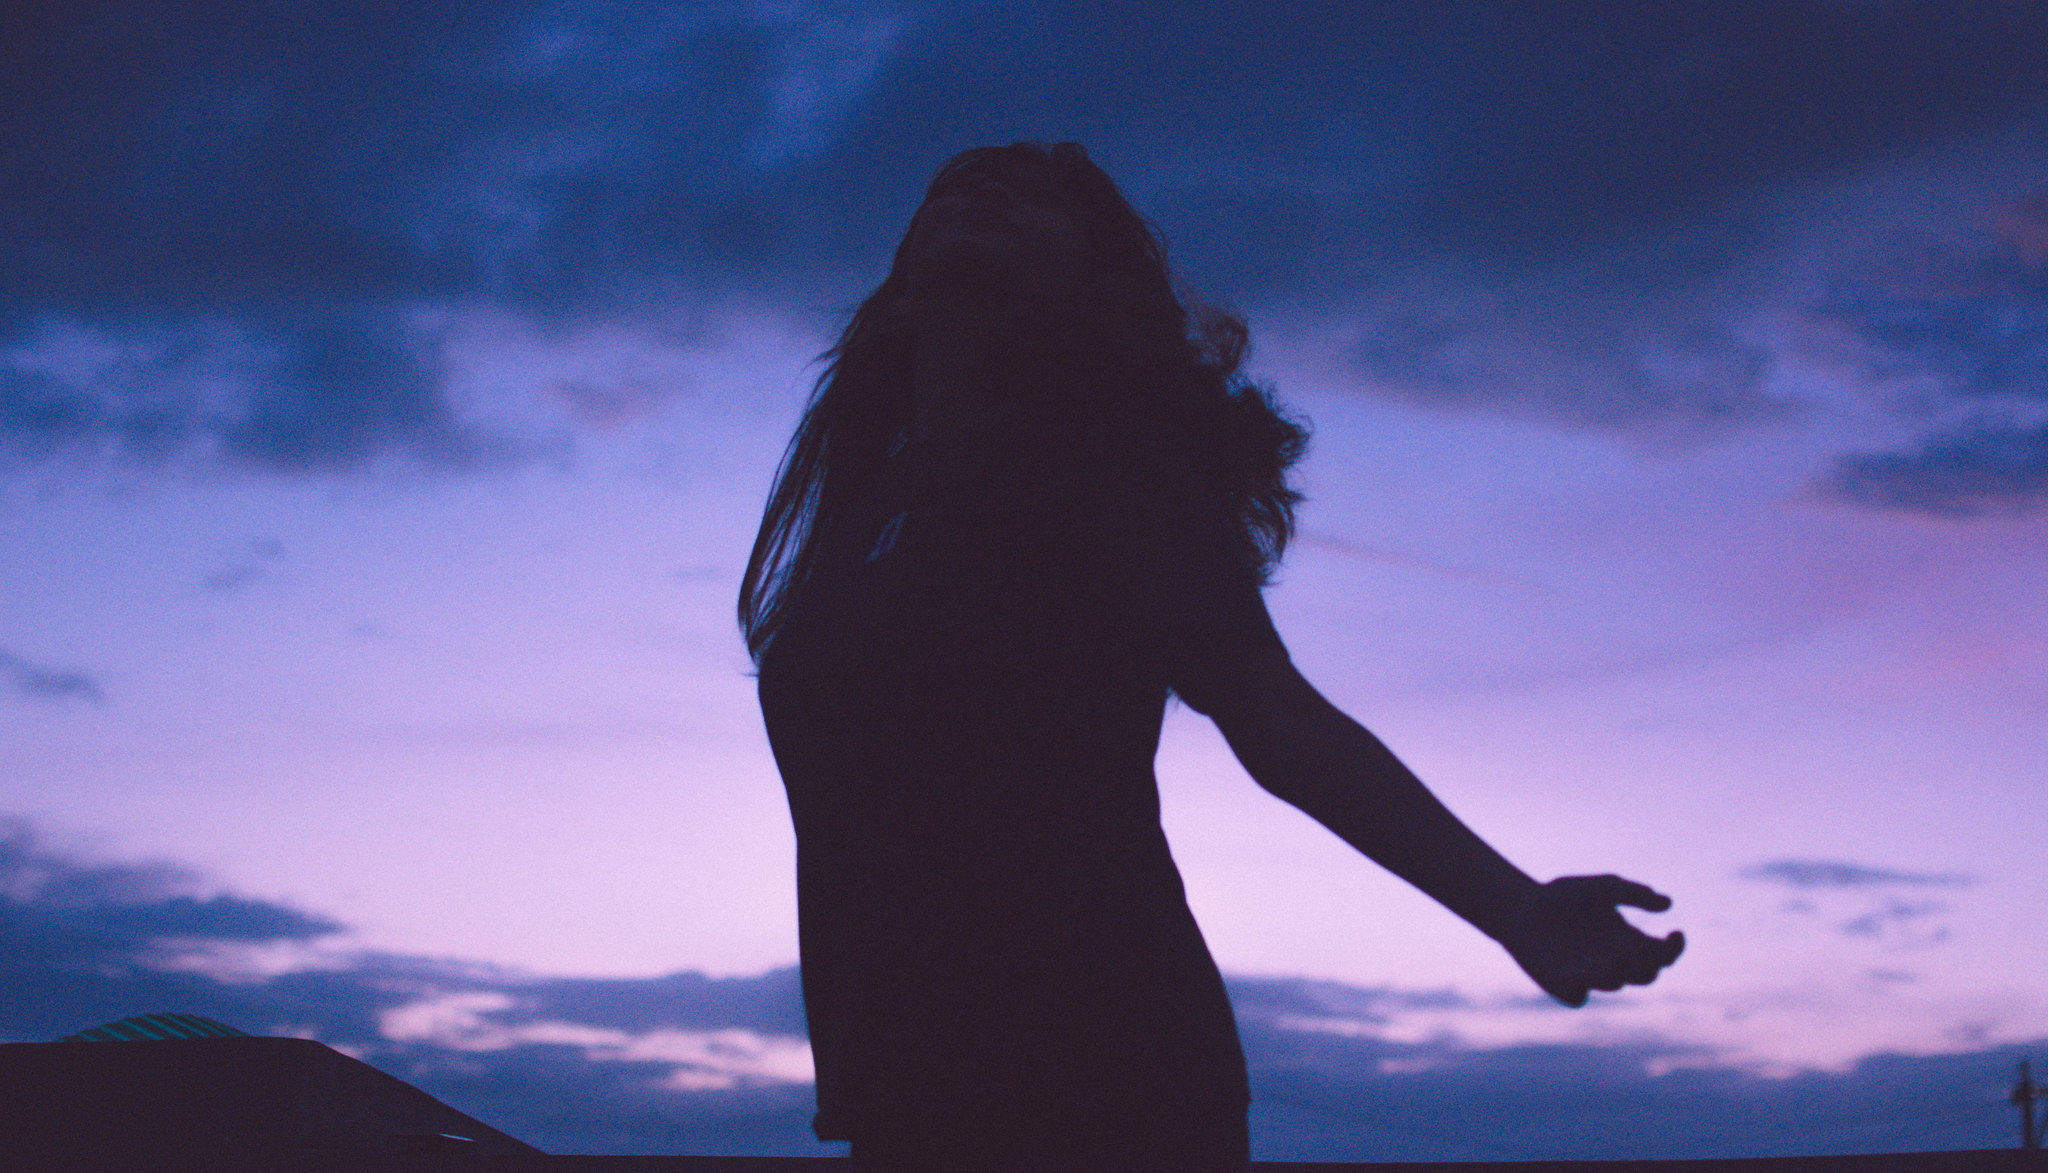 A silhouette of a woman against a purple night sky